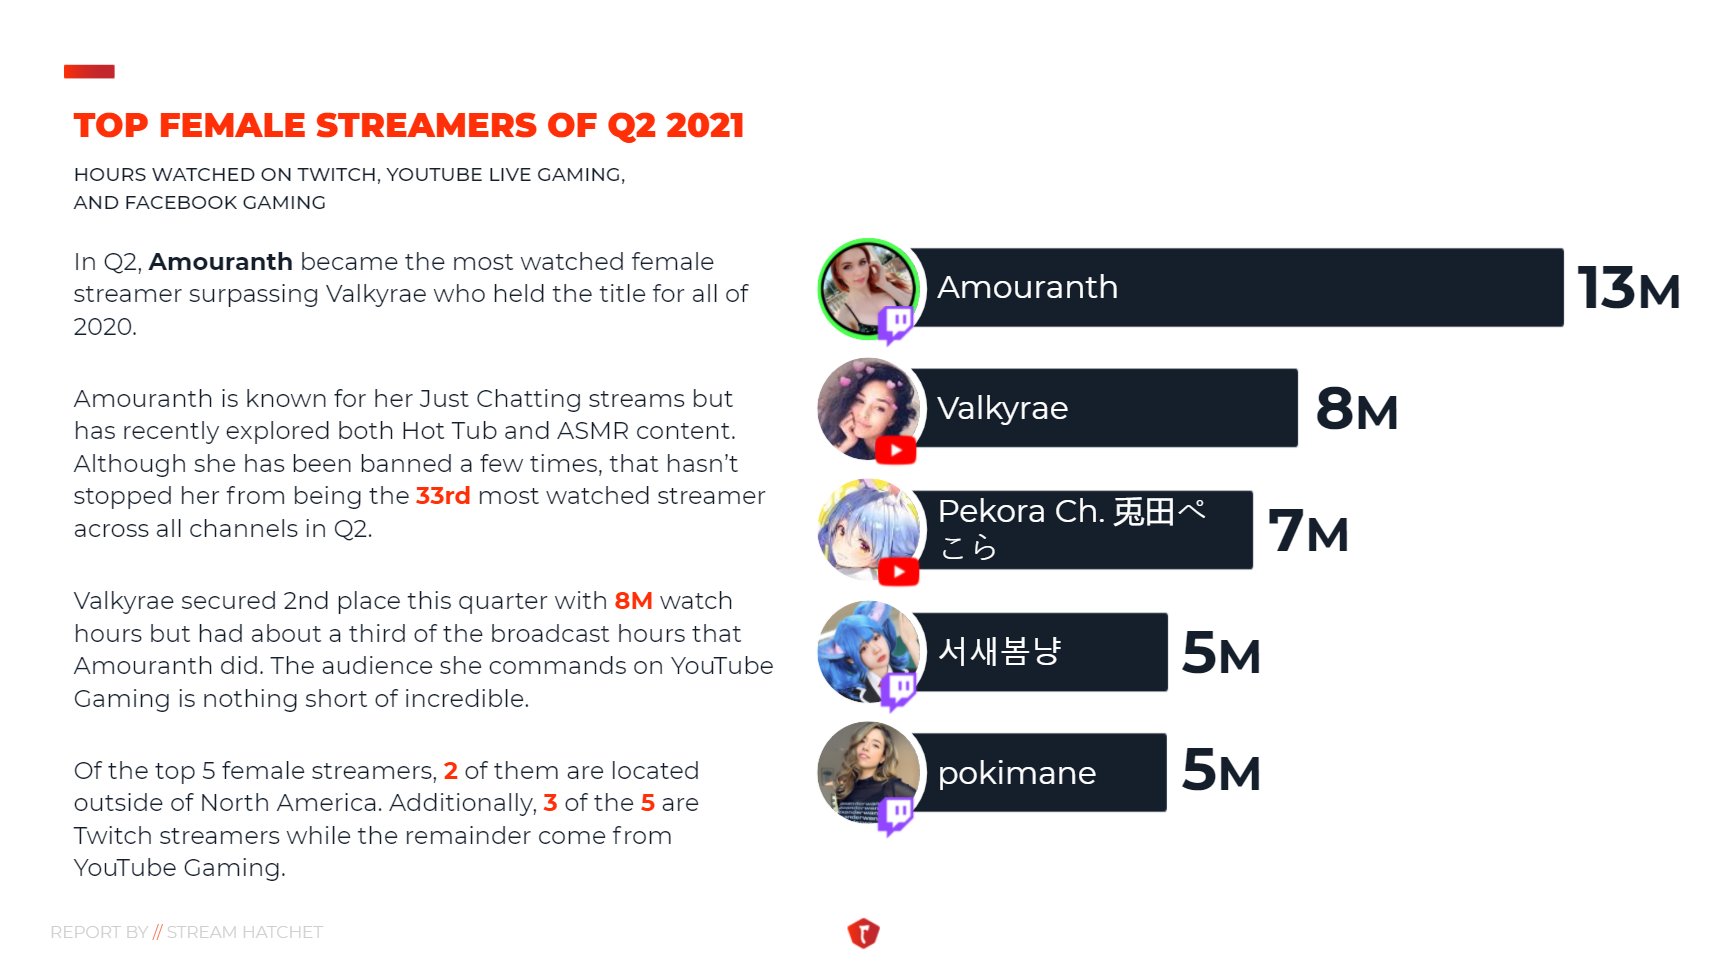 Stream Hatchet on Twitter: "Of all female streamers in Q2 2021, @Amouranth generated the most hours watched with 13M! However, 2 of the 3 females call @YouTubeGaming home. Both @Valkyrae and @